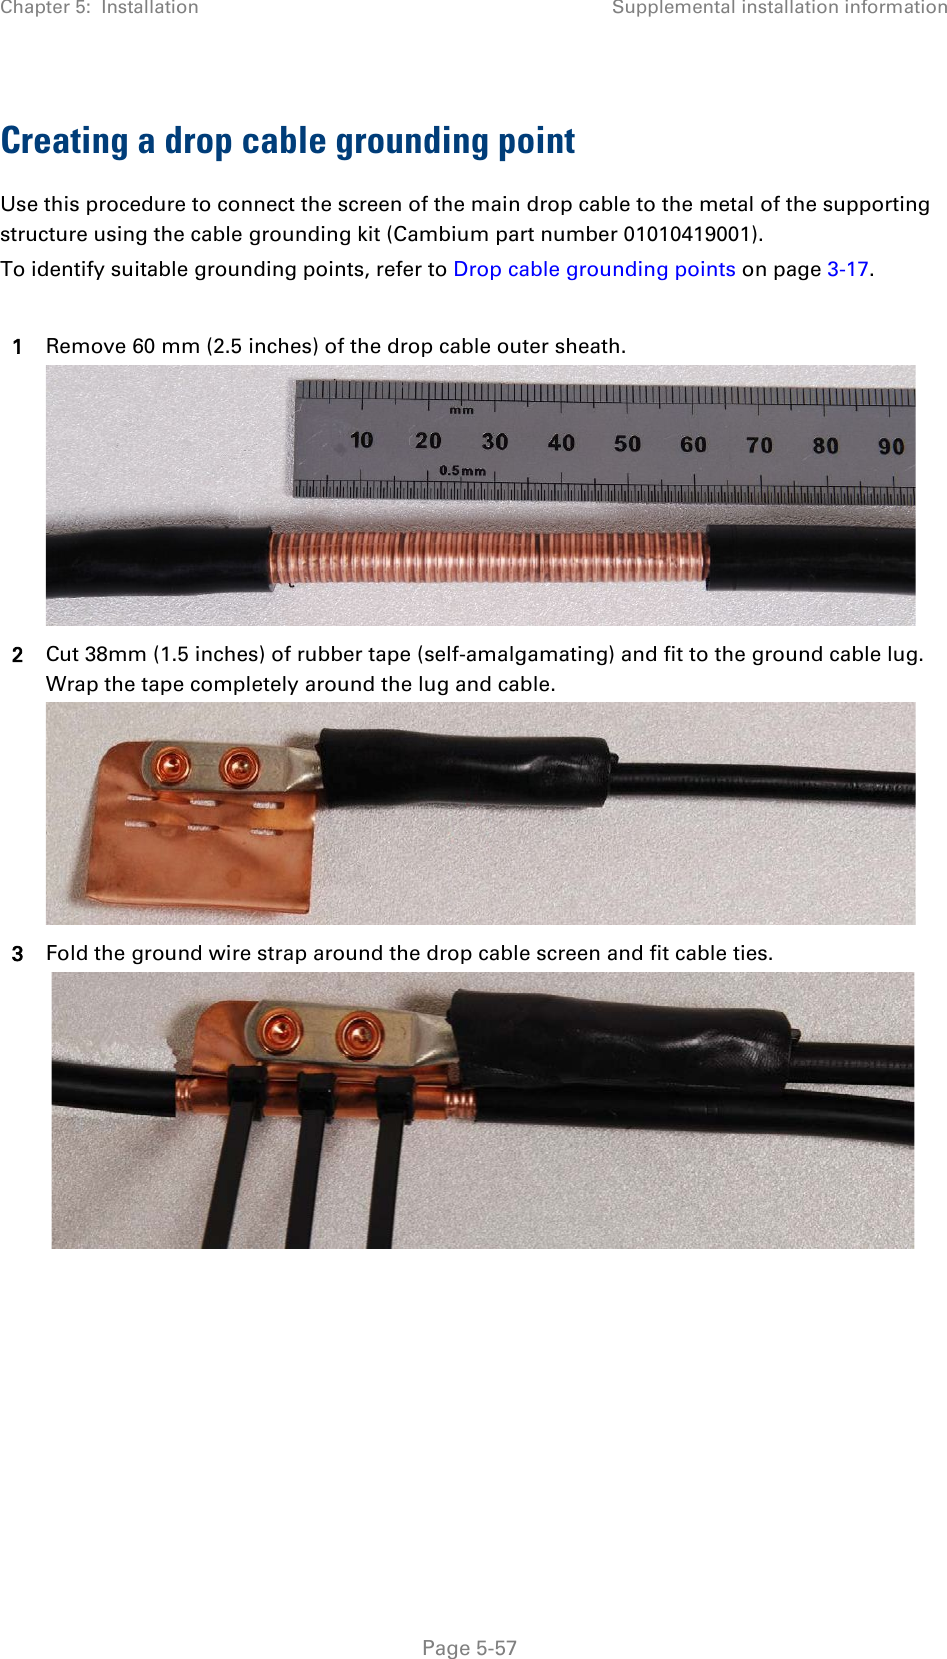 Chapter 5:  Installation Supplemental installation information  Creating a drop cable grounding point Use this procedure to connect the screen of the main drop cable to the metal of the supporting structure using the cable grounding kit (Cambium part number 01010419001). To identify suitable grounding points, refer to Drop cable grounding points on page 3-17.  1 Remove 60 mm (2.5 inches) of the drop cable outer sheath.  2 Cut 38mm (1.5 inches) of rubber tape (self-amalgamating) and fit to the ground cable lug. Wrap the tape completely around the lug and cable.  3 Fold the ground wire strap around the drop cable screen and fit cable ties.    Page 5-57 